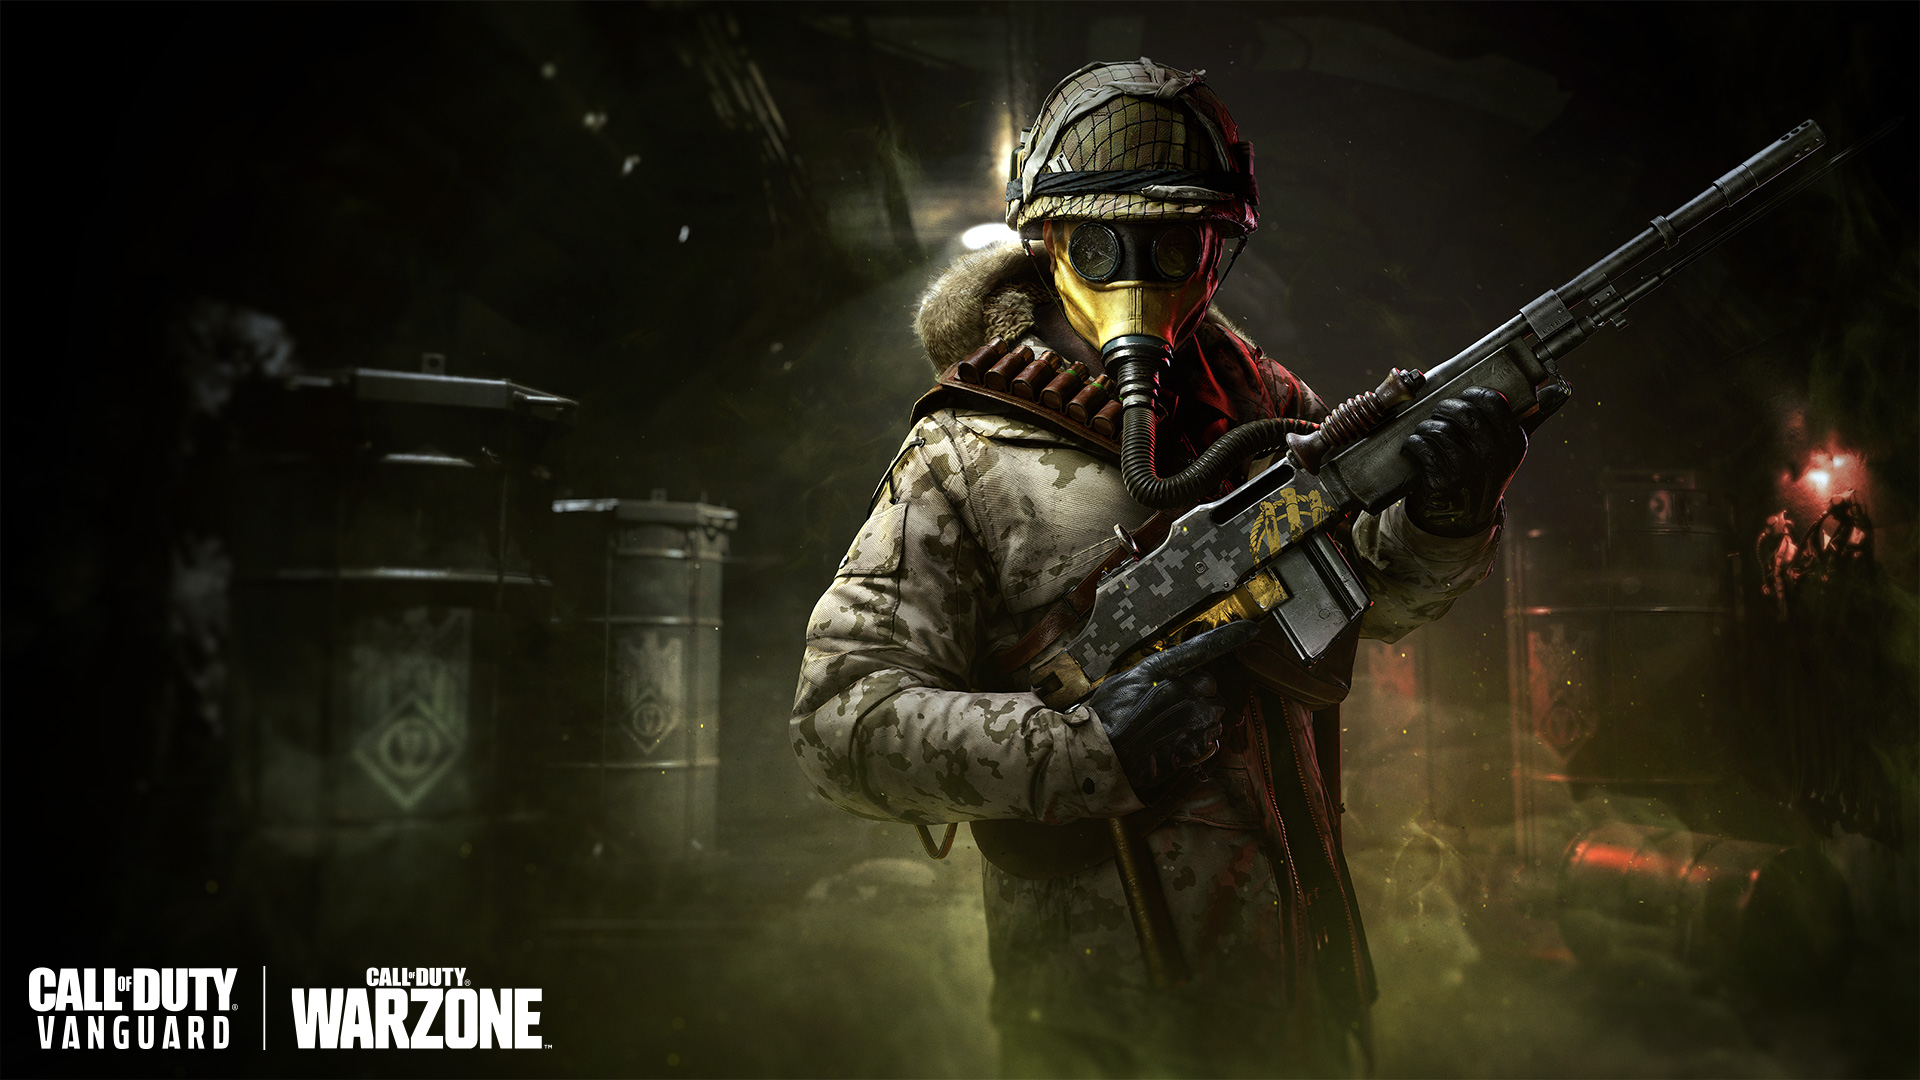 Claim 2 FREE Bundles for Warzone Pacific with Prime Gaming